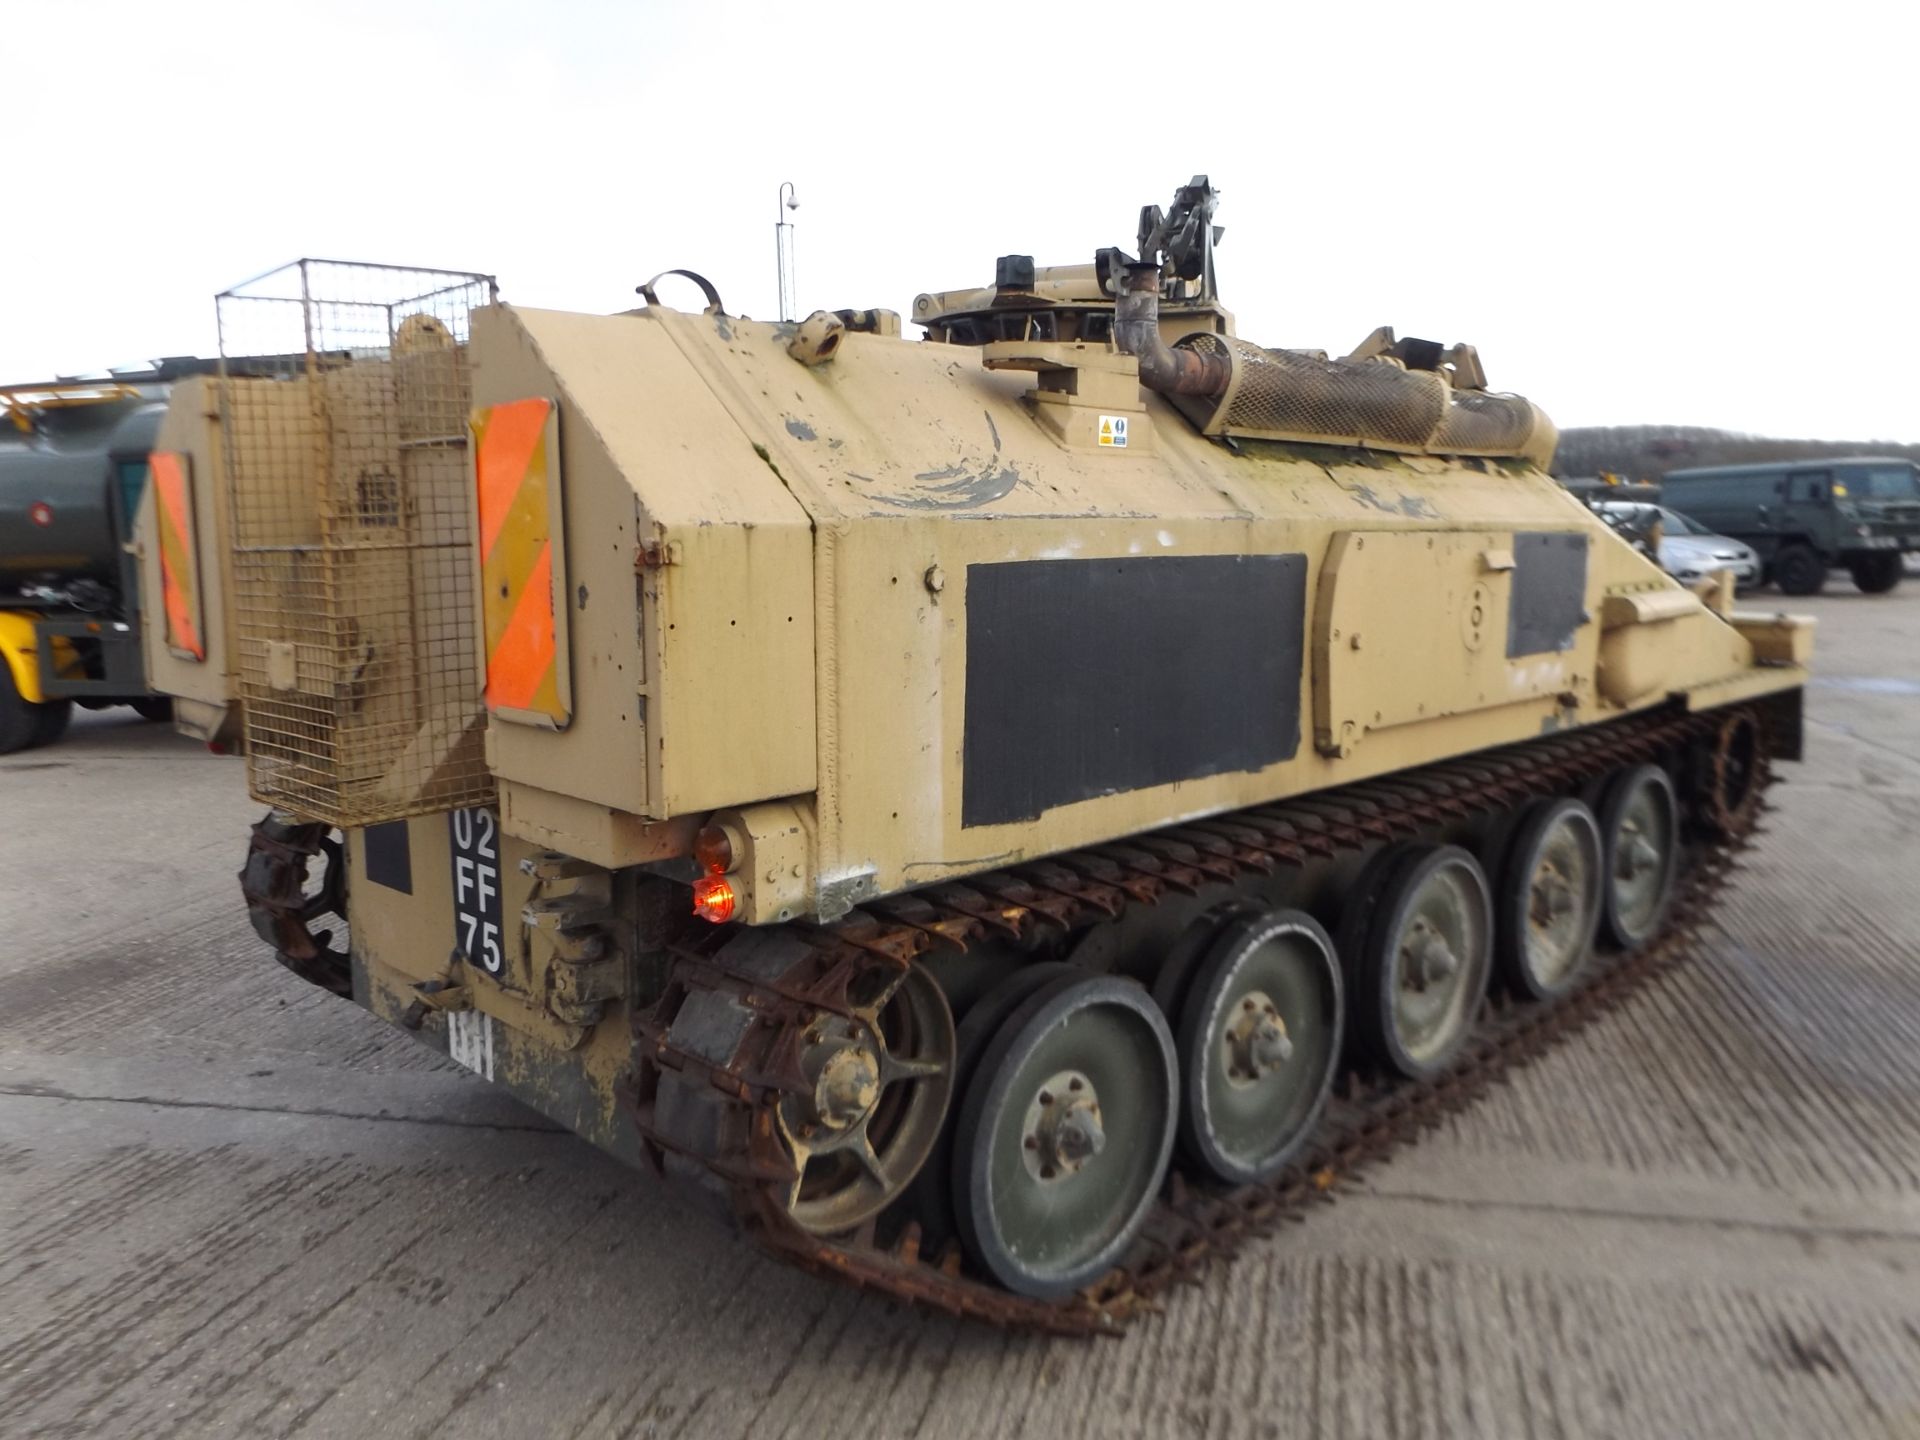 Dieselised CVRT (Combat Vehicle Reconnaissance Tracked) Spartan Armoured Personnel Carrier - Image 8 of 21